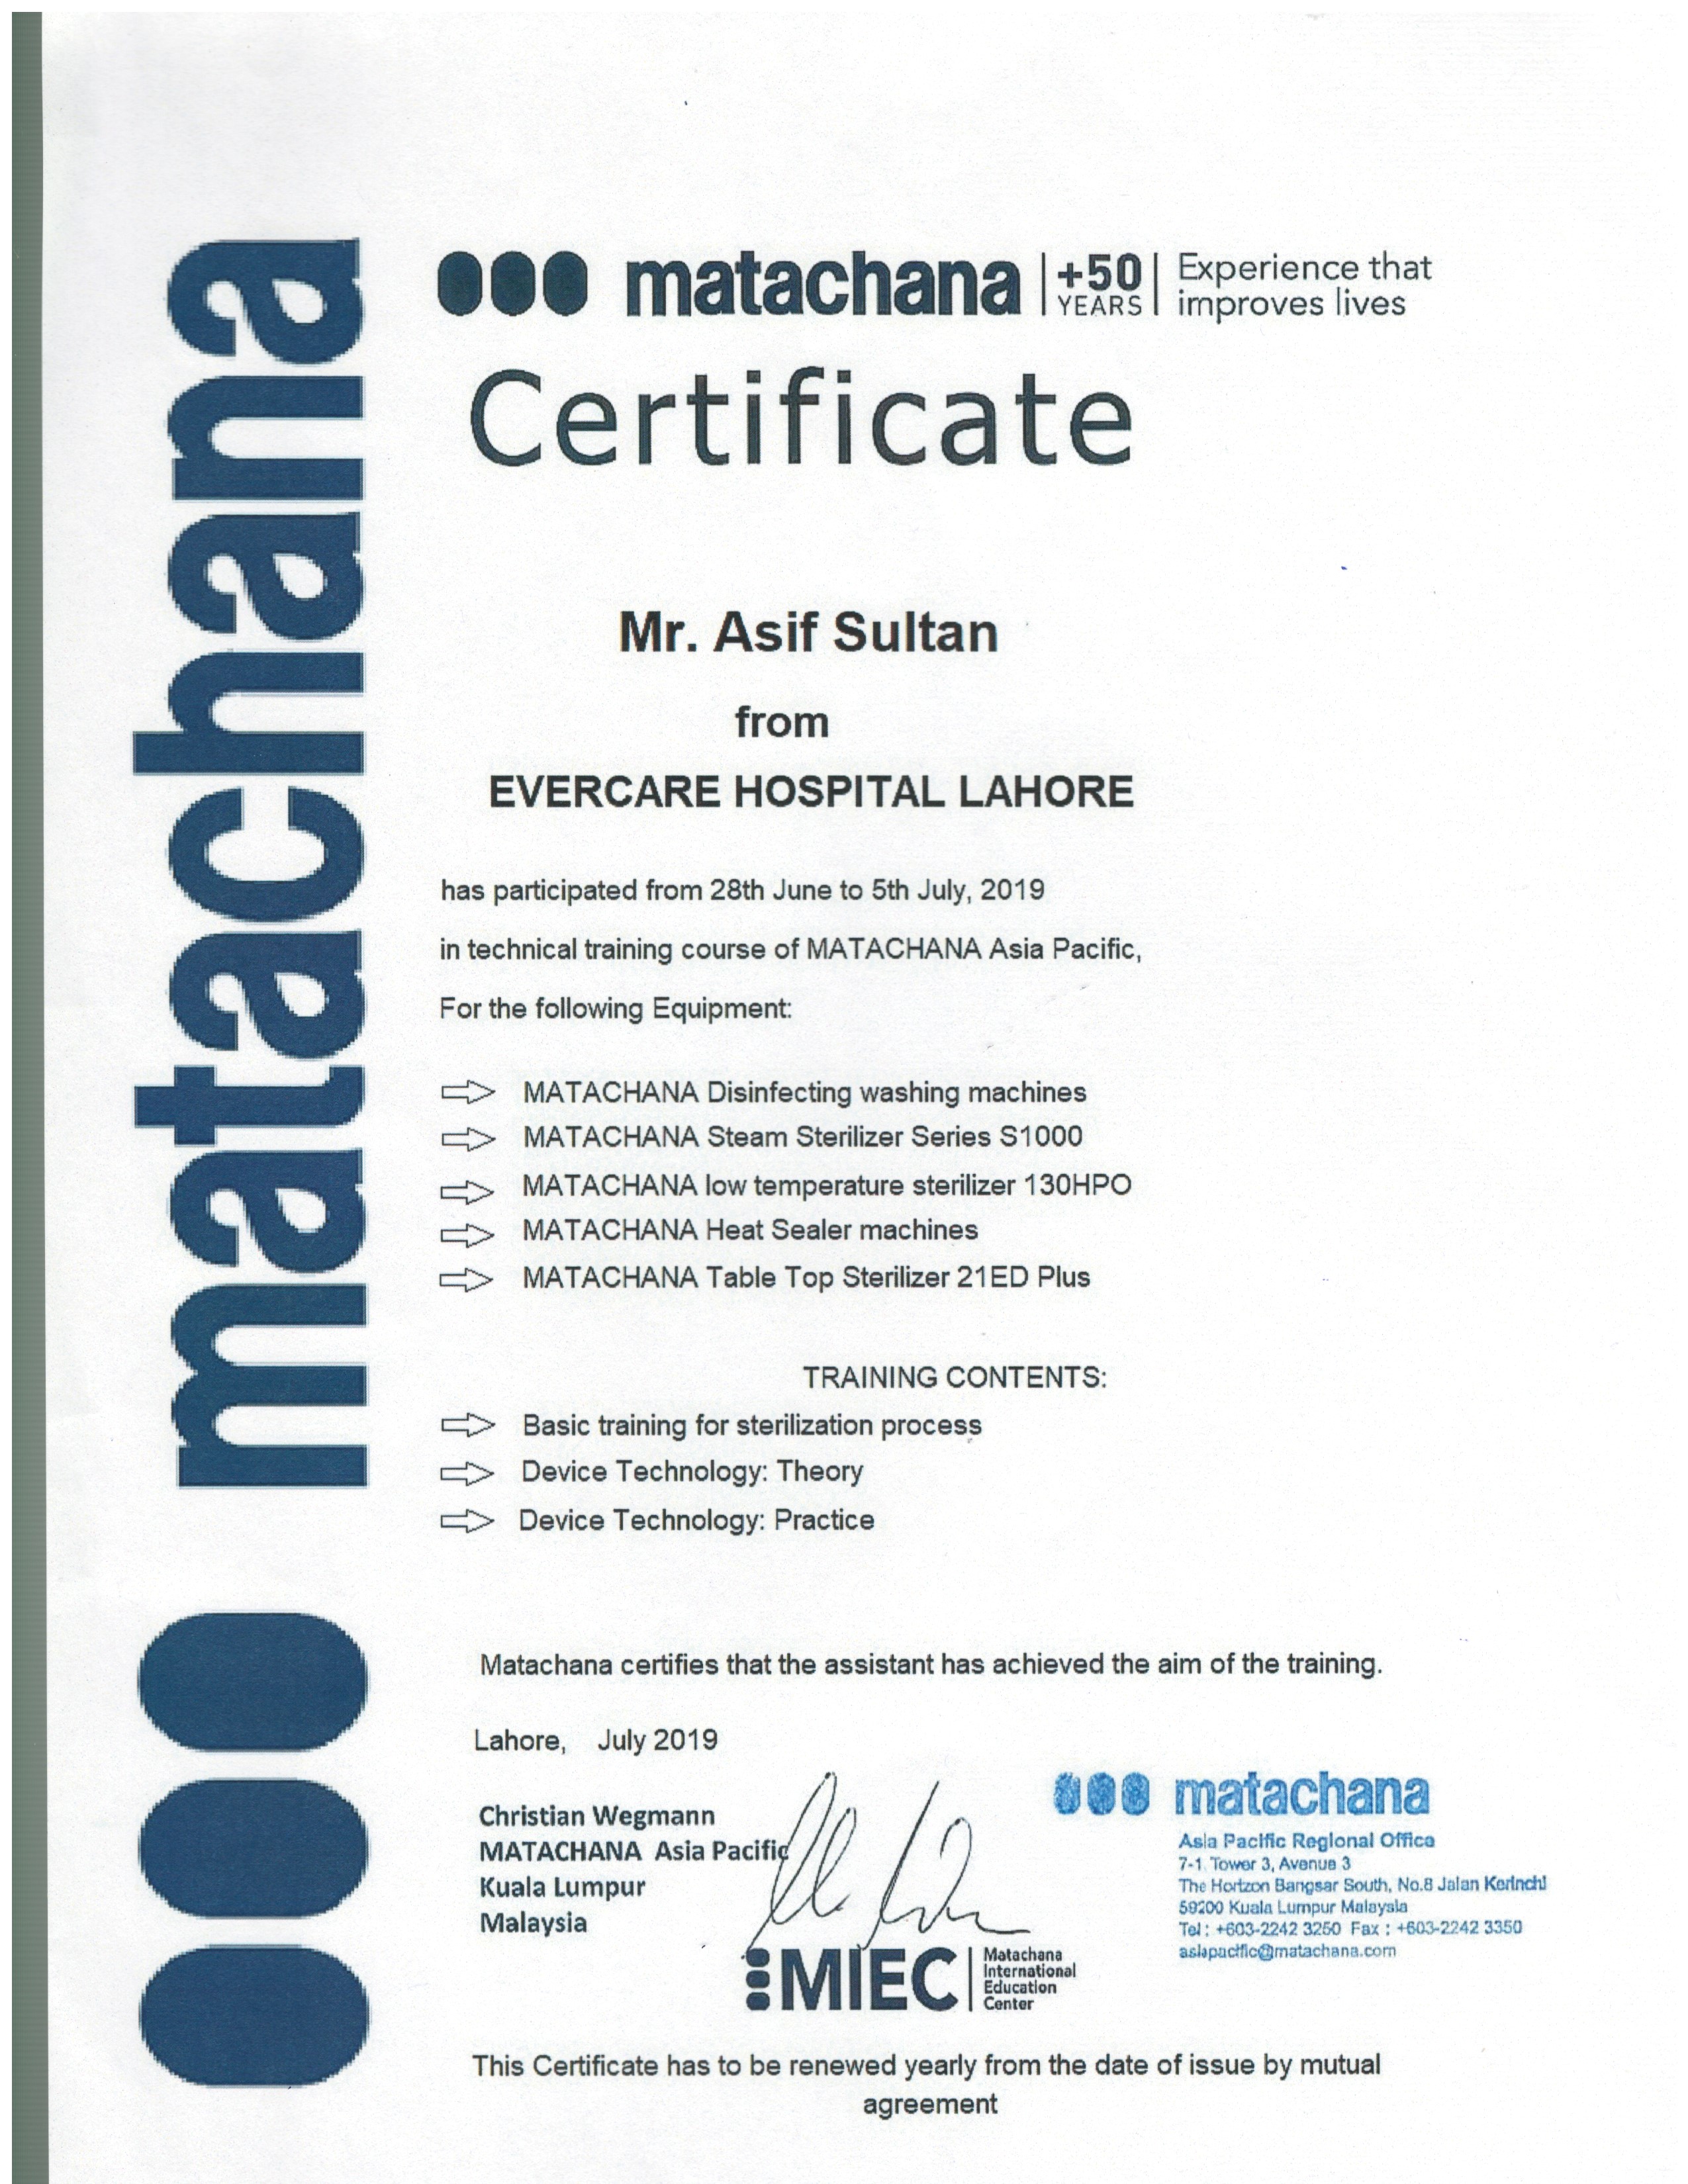 000 matachana

000 matachana +39] foenence o
Certificate

Mr. Asif Sultan

from
EVERCARE HOSPITAL LAHORE

has participated from 28th June to 5th July, 2019
in technical training course of MATACHANA Asia Pacific,

For the following Equipment:

MATACHANA Disinfecting washing machines
MATACHANA Steam Sterilizer Series S1000
MATACHANA low temperature sterilizer 130HPO
MATACHANA Heat Sealer machines
MATACHANA Table Top Sterilizer 21ED Plus

WOU Y

TRAINING CONTENTS:
Basic training for sterilization process
Device Technology: Theory

00d

Device Technology: Practice

Matachana certifies that the assistant has achieved the aim of the training.

Lahore, July 2019

Christian Wegmann / : i & 8 matachana

Asla Pacific Reglonal Offica
MATACHANA Asia Pacifi / a
Kuala Lumpur The Horizon Bangsar South, No.8 Jalan Kerinch!
59200 Kuala Lumpur Malaysia
Malaysia py, ED Tol: +603-2242 3250 Fax ; +603-2242 3360
Matachana ashpactfic@matachana.com
@ International
Education
@ Center

 

This Certificate has to be renewed yearly from the date of issue by mutual
agreement